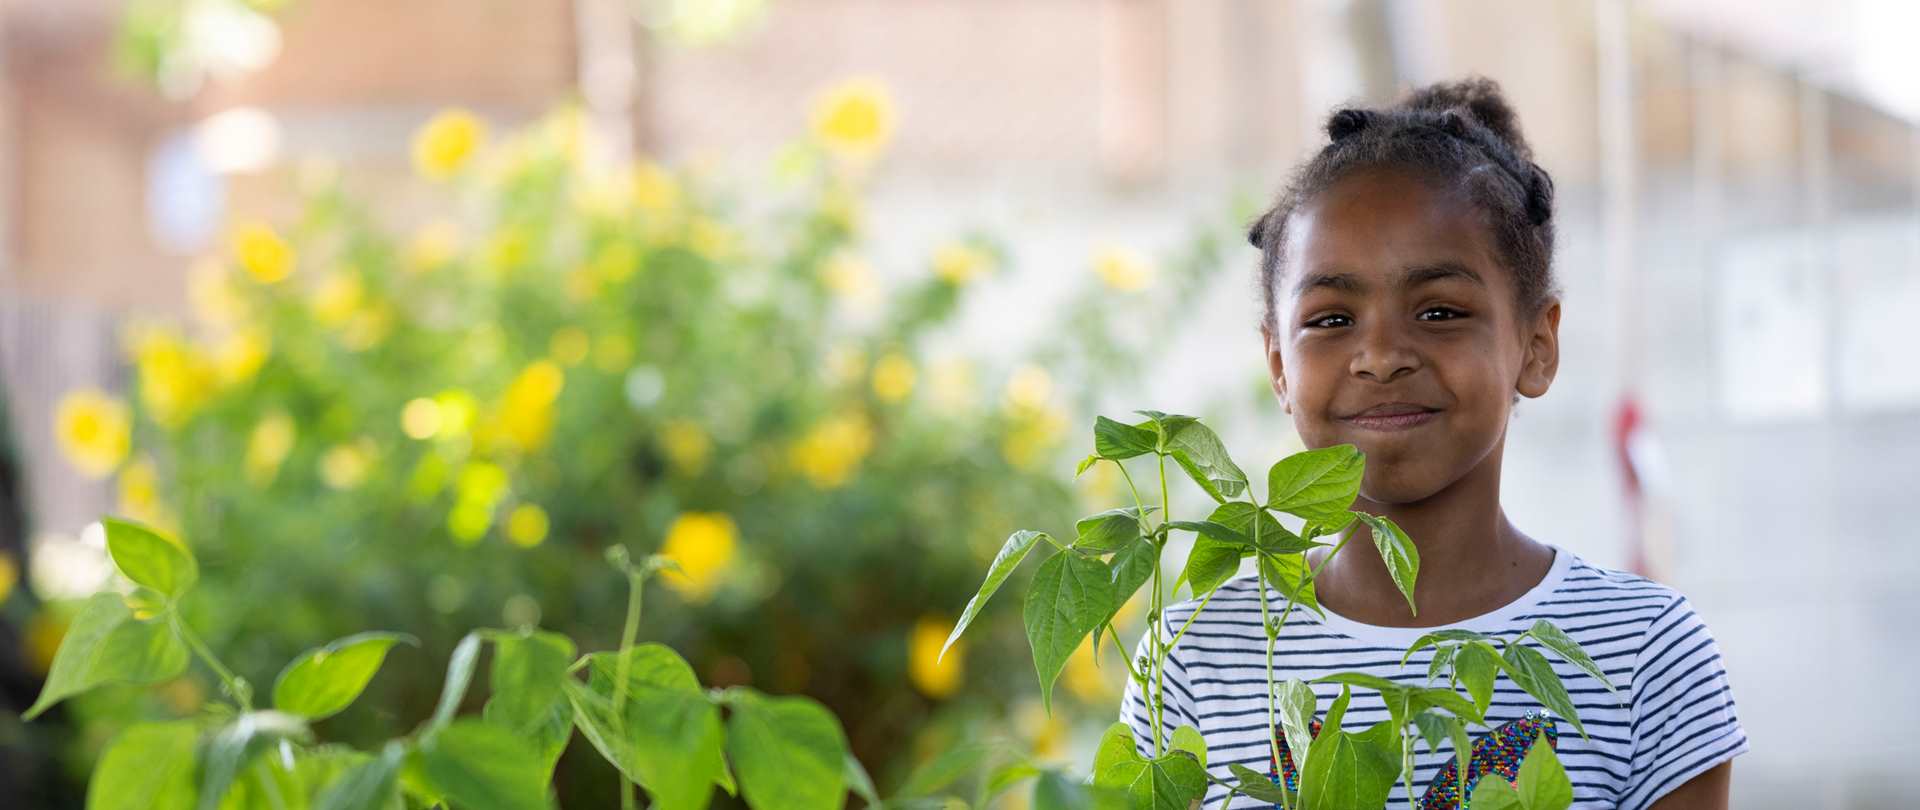 Child smiling in a greenhouse